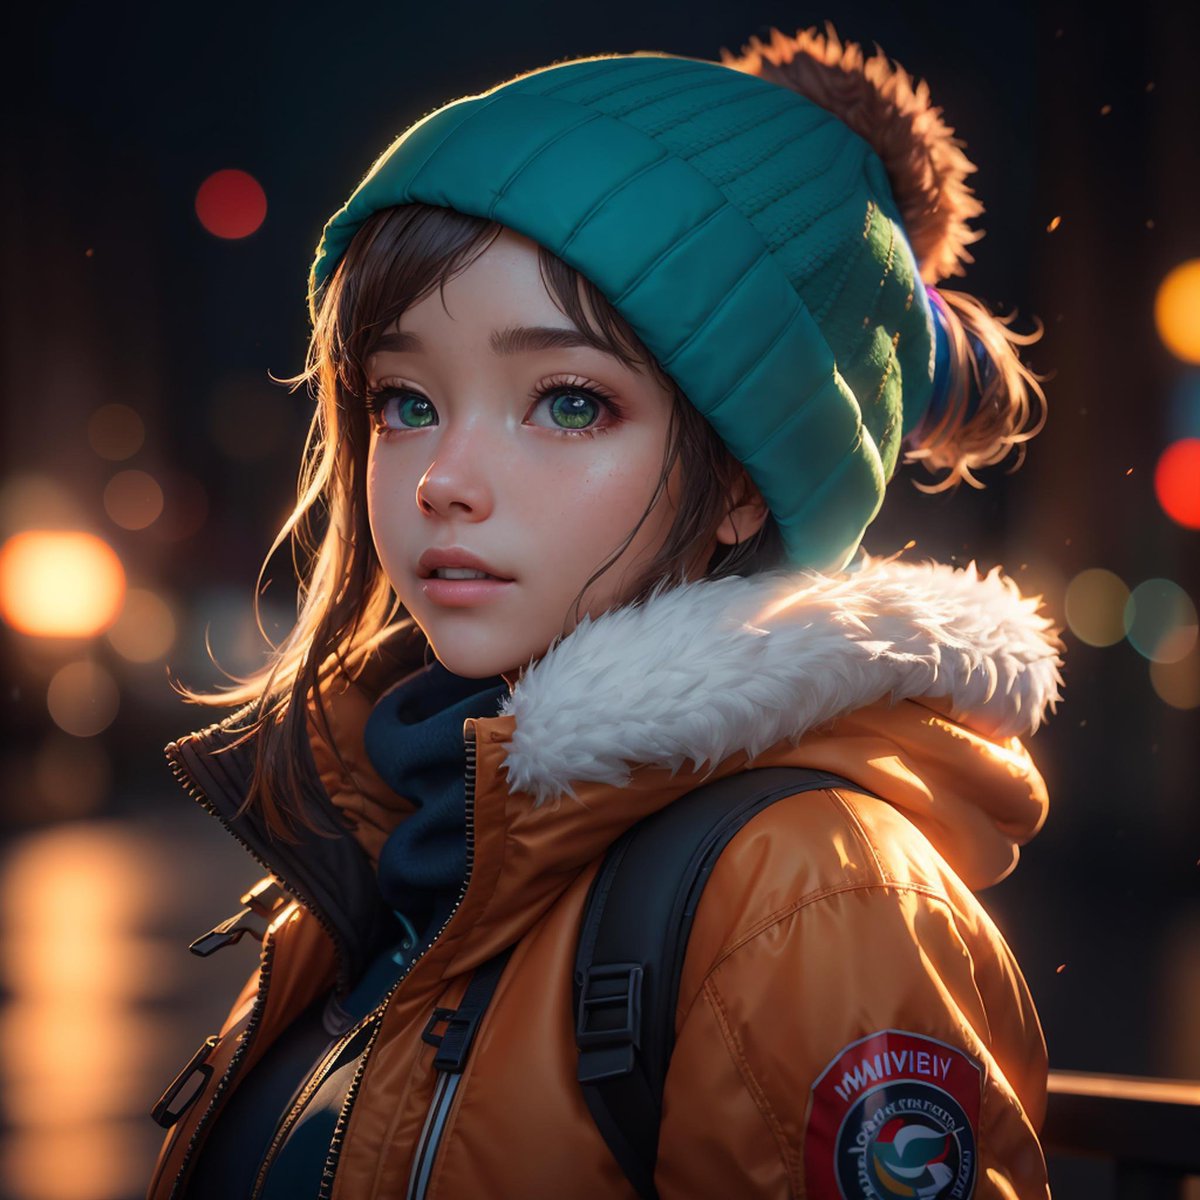 Winter Jackets 
#winter #winterjacket #aiartgallery #AIArtistCommunity #AIartist #aifantasy #AIart #aiartwork #aiartlove #aidrawing #magicai #aiartcreator #aiartcommuity #aigeneratedimages #aiartsociety #aigirls